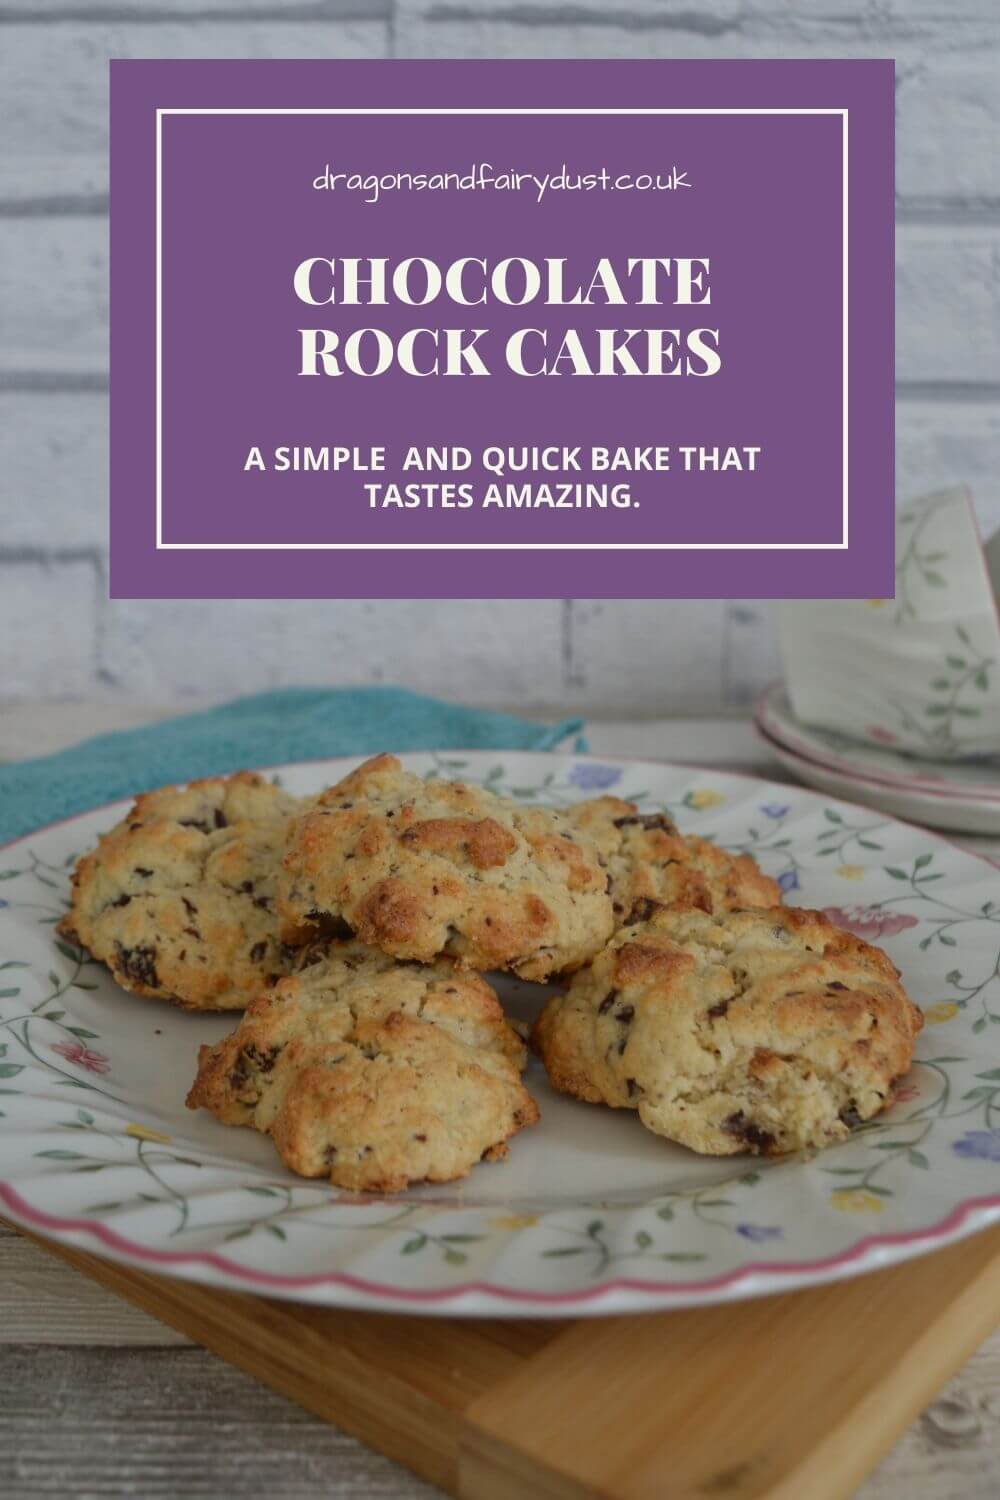 Chocolate rock cakes are a simple and delicious bake. Once you try one you will come back for more.